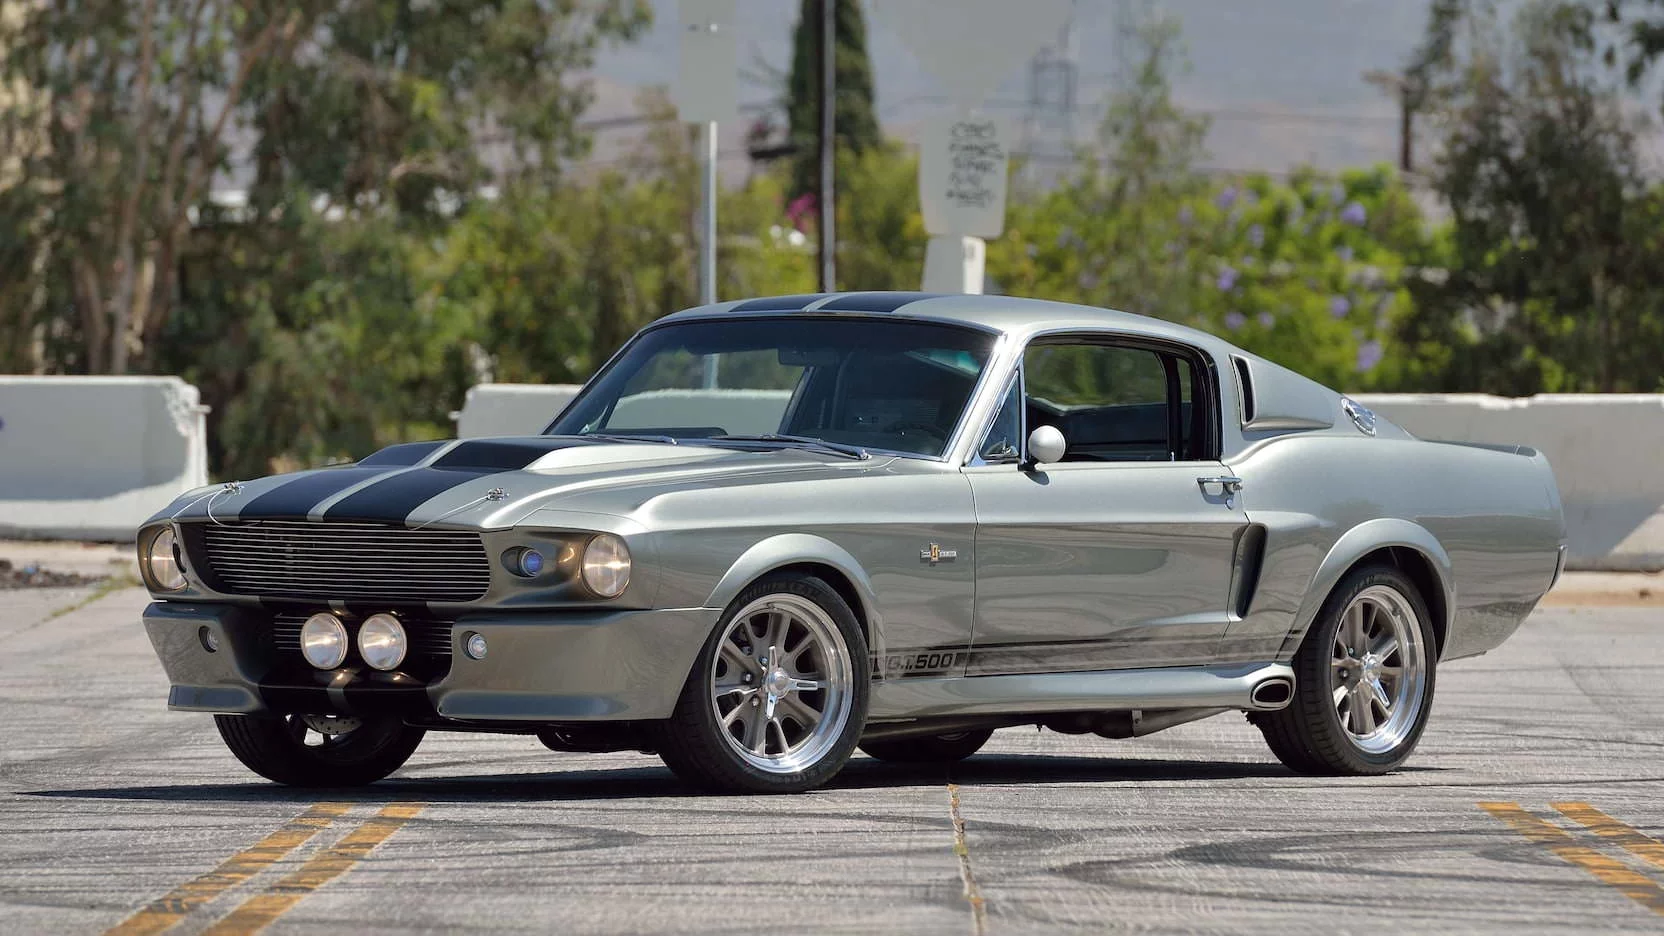 1967 Ford Mustang Shelby Gt500 Eleanor From Gone In 60 Seconds Heads To Auction Autoevolution